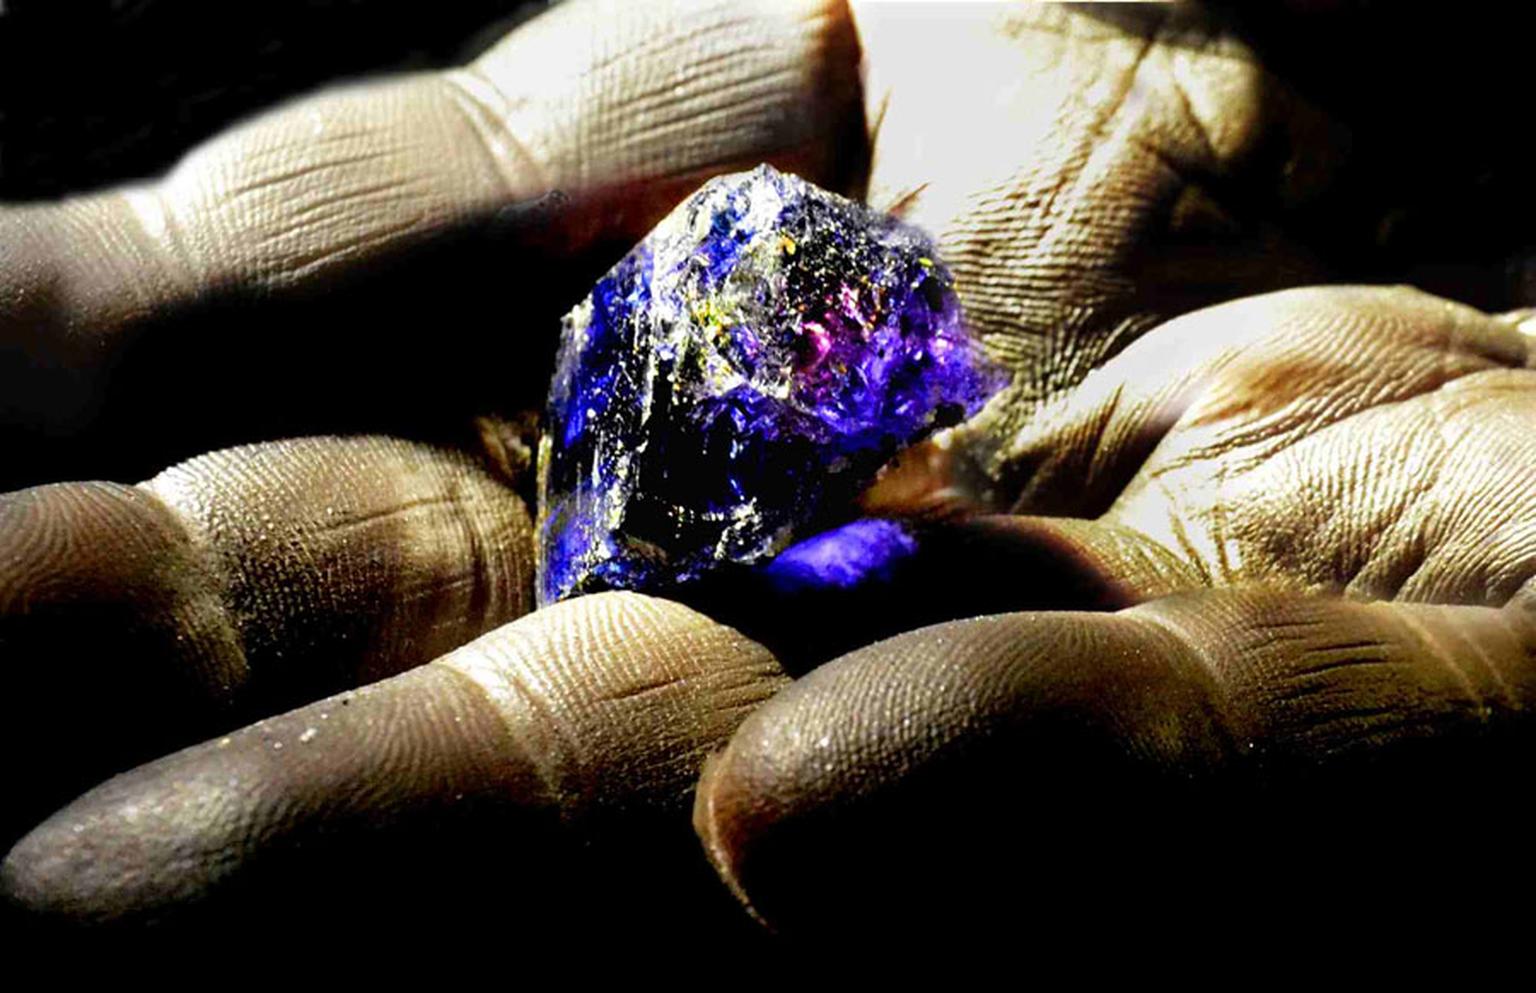 Rough tanzanite photographed deep underground at TanzaniteOne, illustrating "pleochrism": the unique ability to show separate blue and violet hues simultaneously.